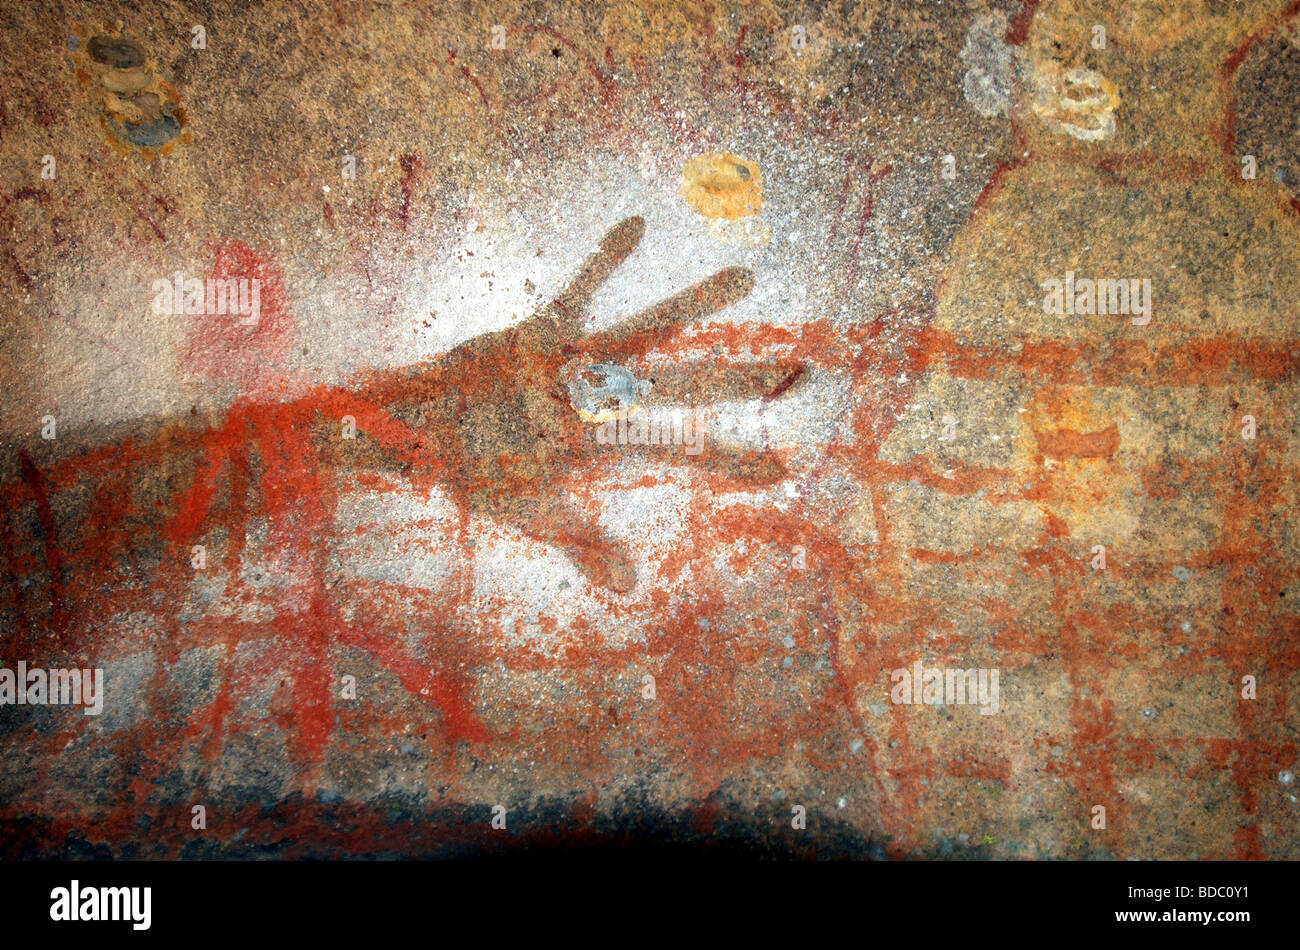 White ochre handprint - the signature of the artist has been painted over several times. Australian aboriginal rock art Stock Photo